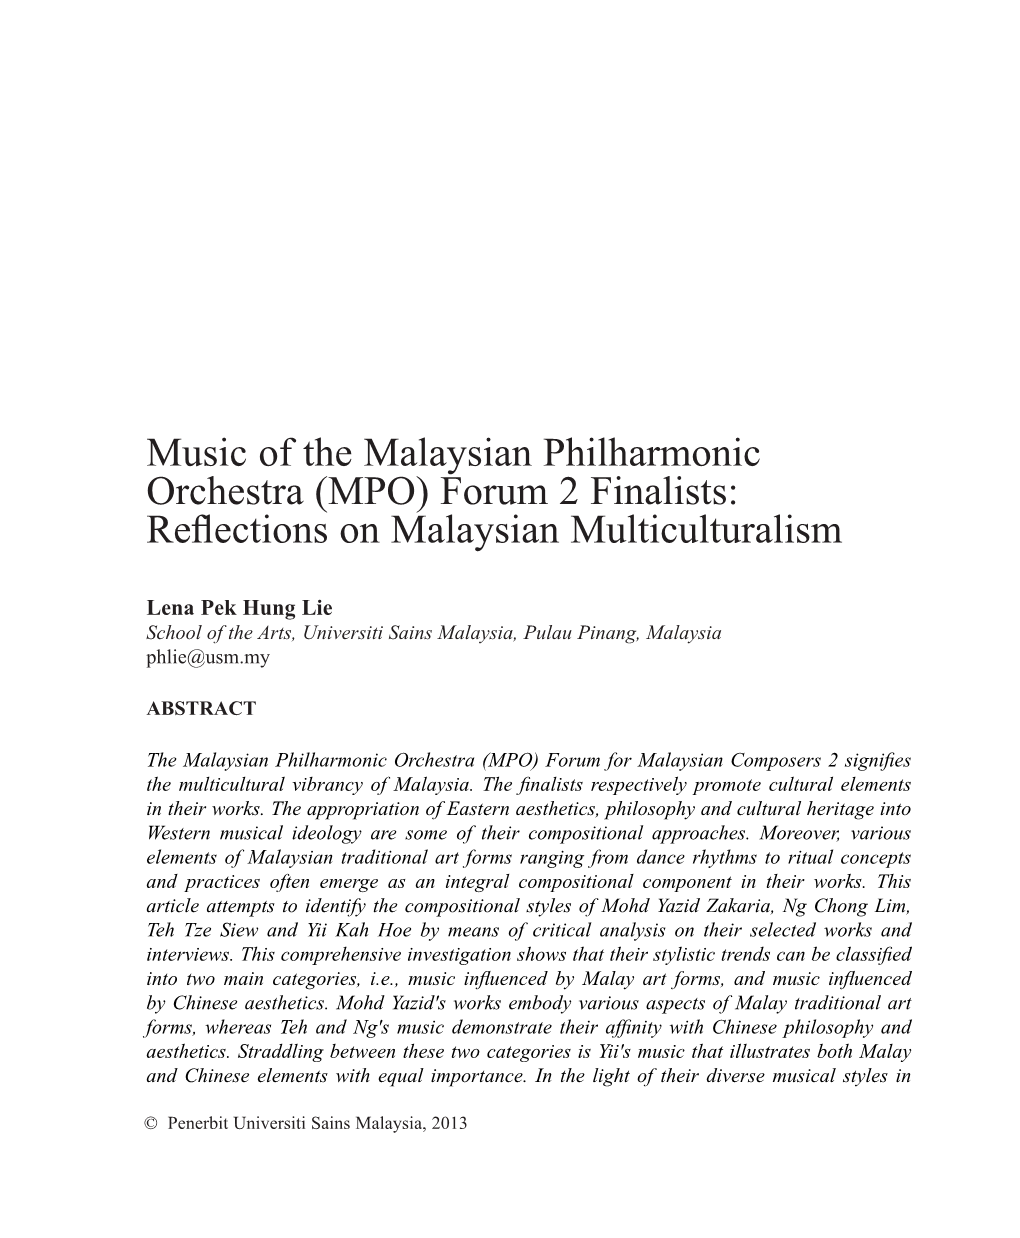 Music of the Malaysian Philharmonic Orchestra (MPO) Forum 2 Finalists: Reflections on Malaysian Multiculturalism